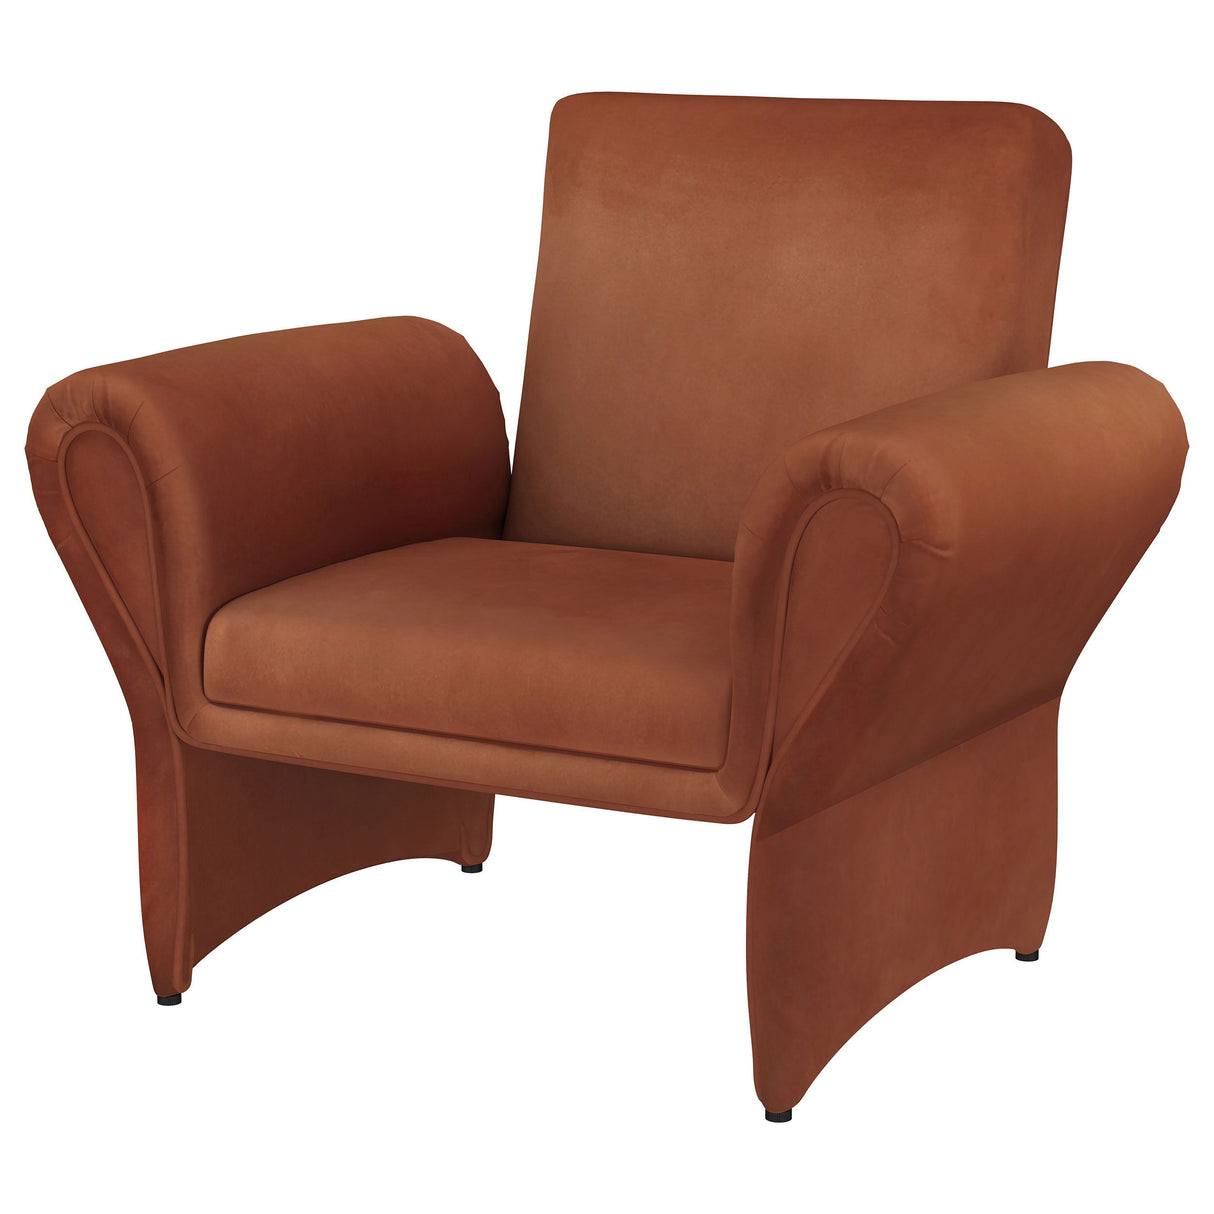 Liana - Upholstered Roll Arm Accent Armchair - Rust Orange